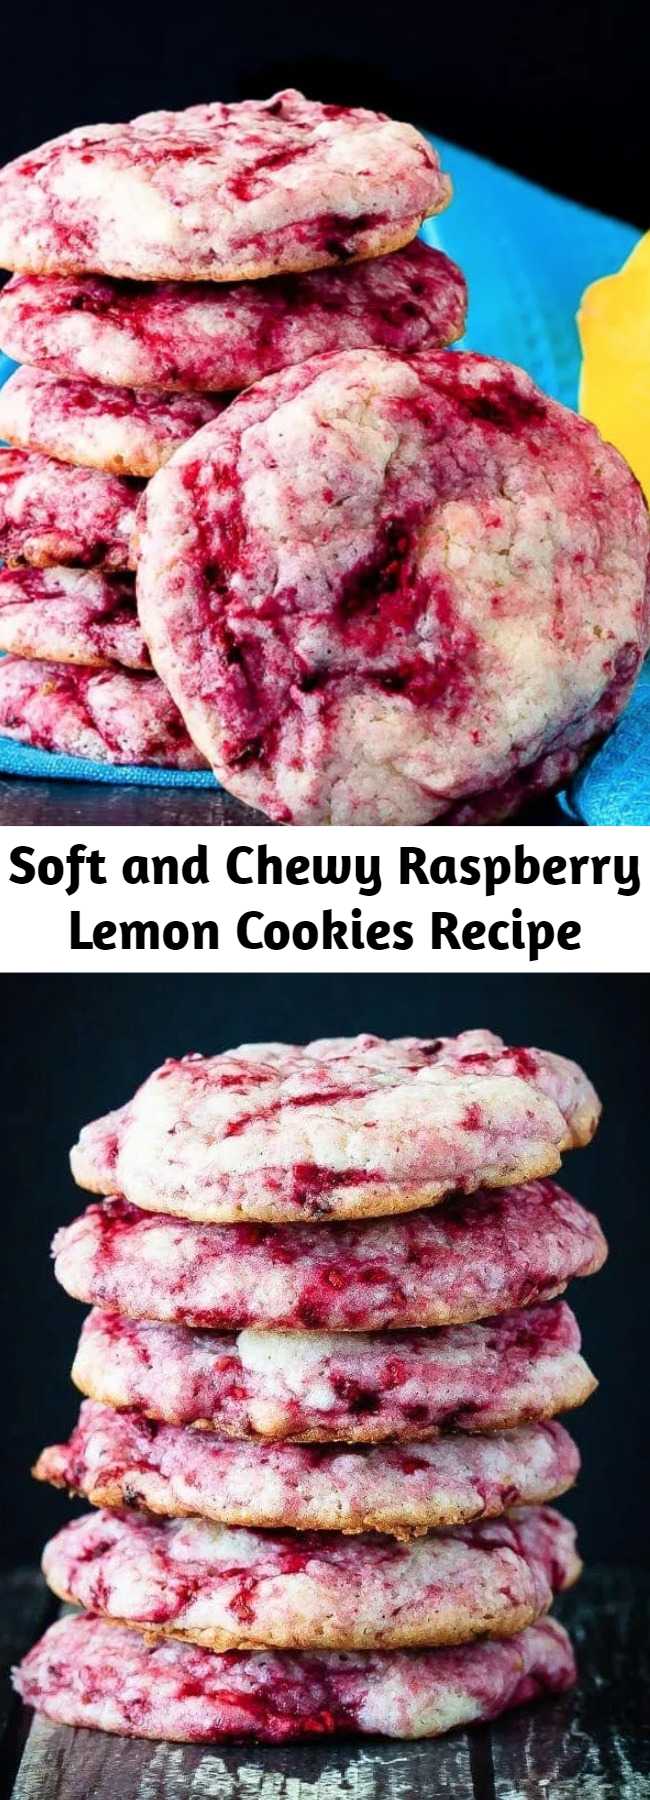 Soft and Chewy Raspberry Lemon Cookies Recipe - These raspberry lemon cookies are ultra soft and chewy - quick and easy to make and so tasty everyone loves them. One of the best cookies I've made!